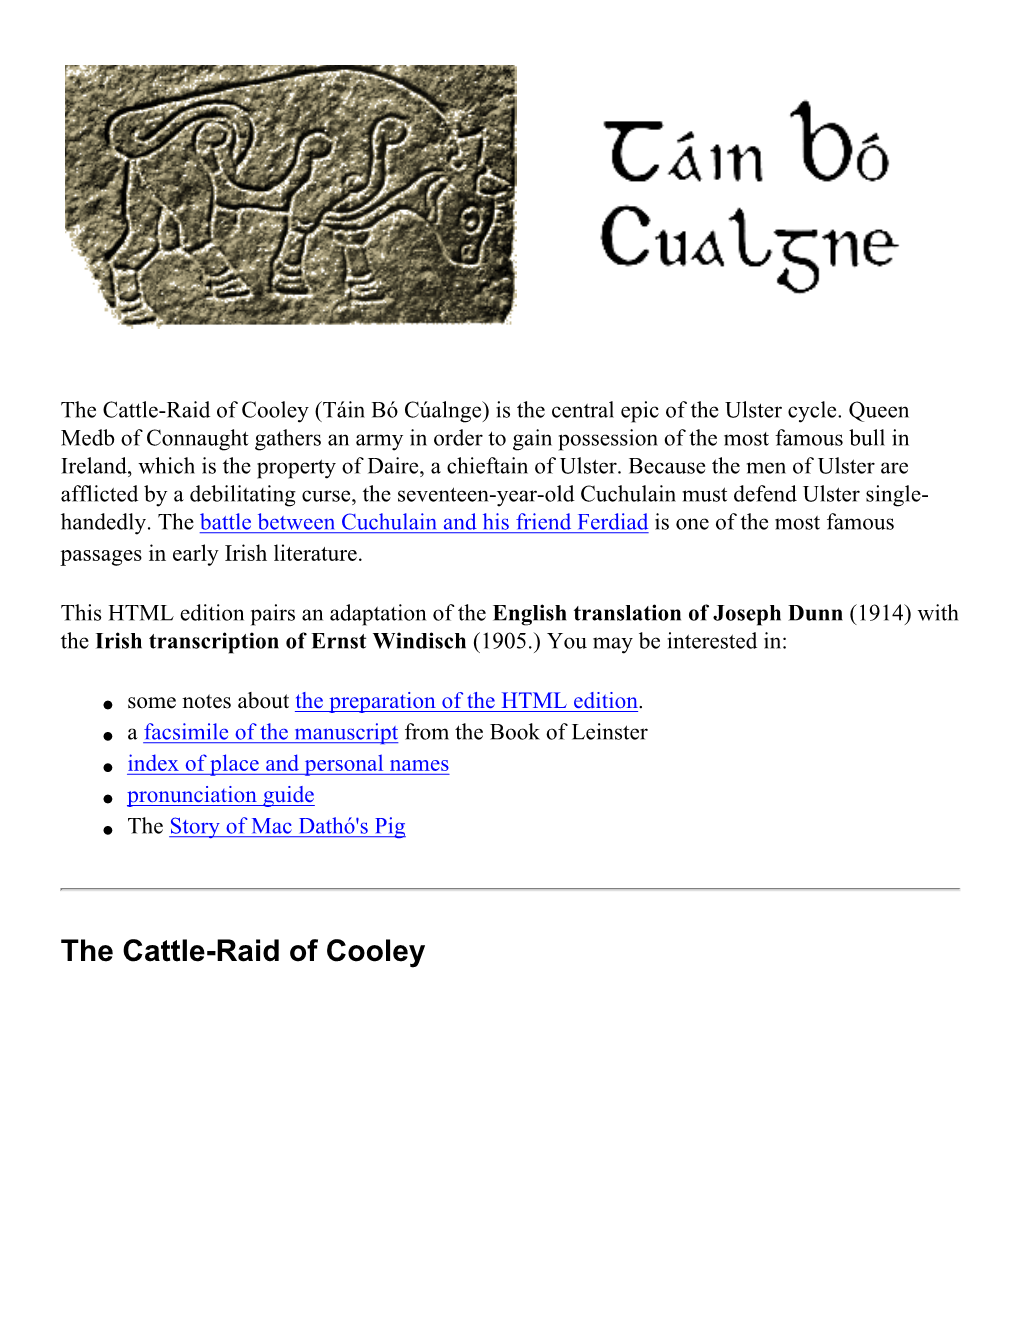 Complete Cattle Raid of Cooley, Irish and English